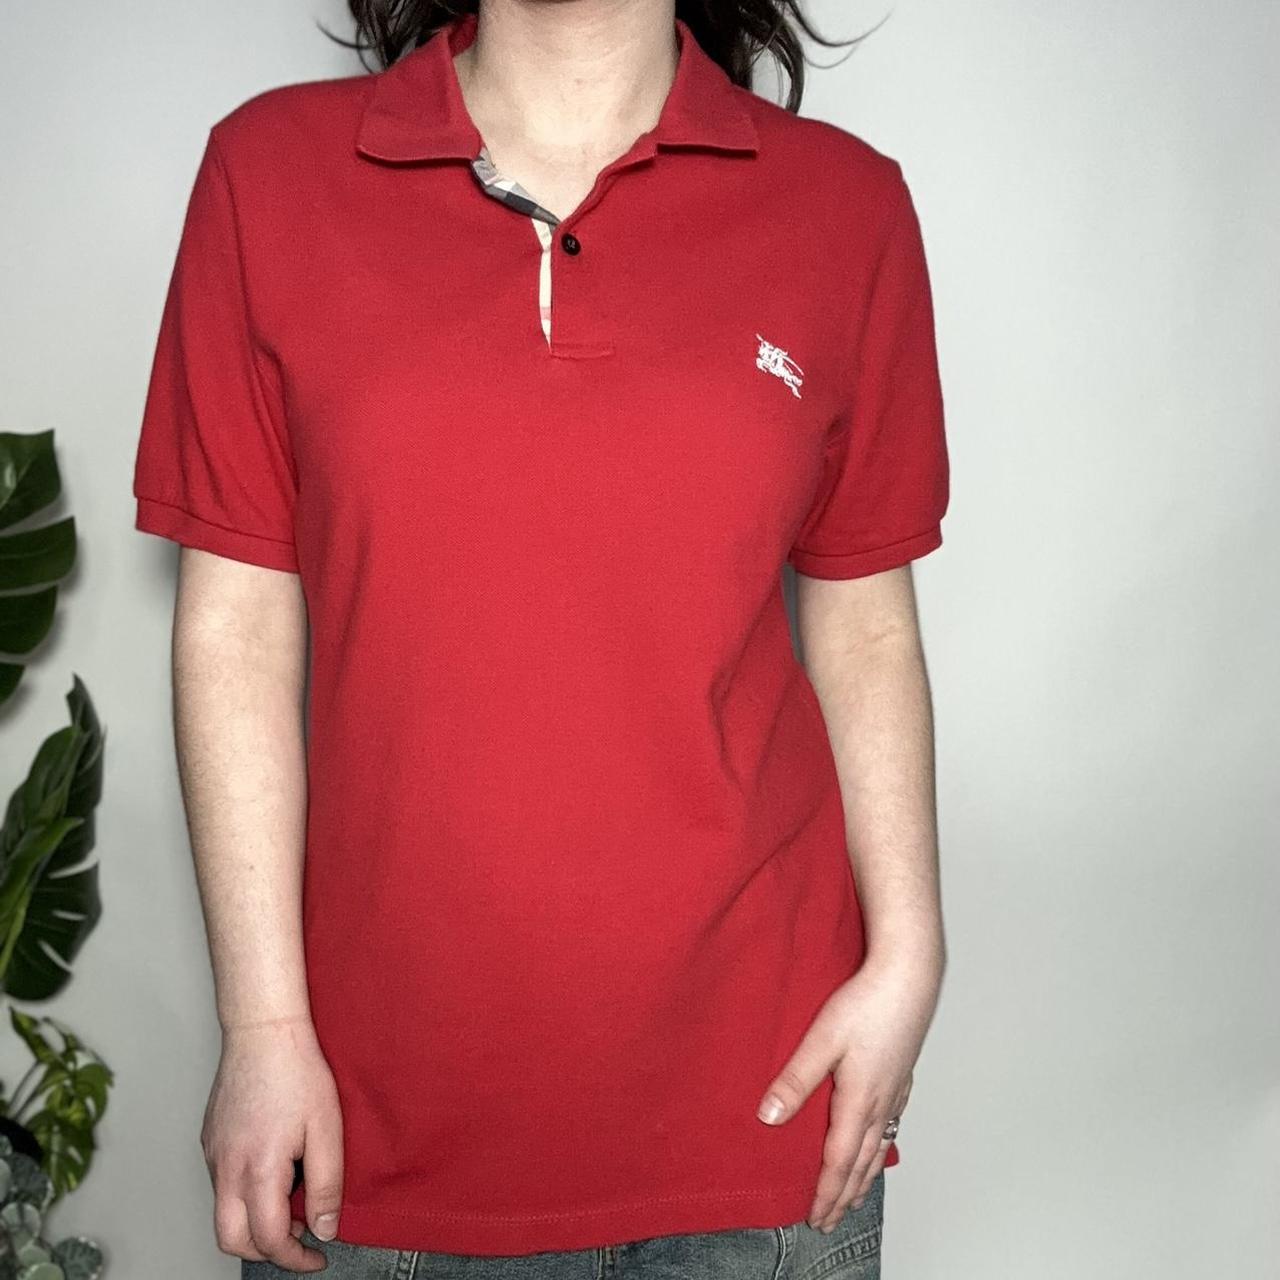 Vintage 90s Burberry red polo shirt